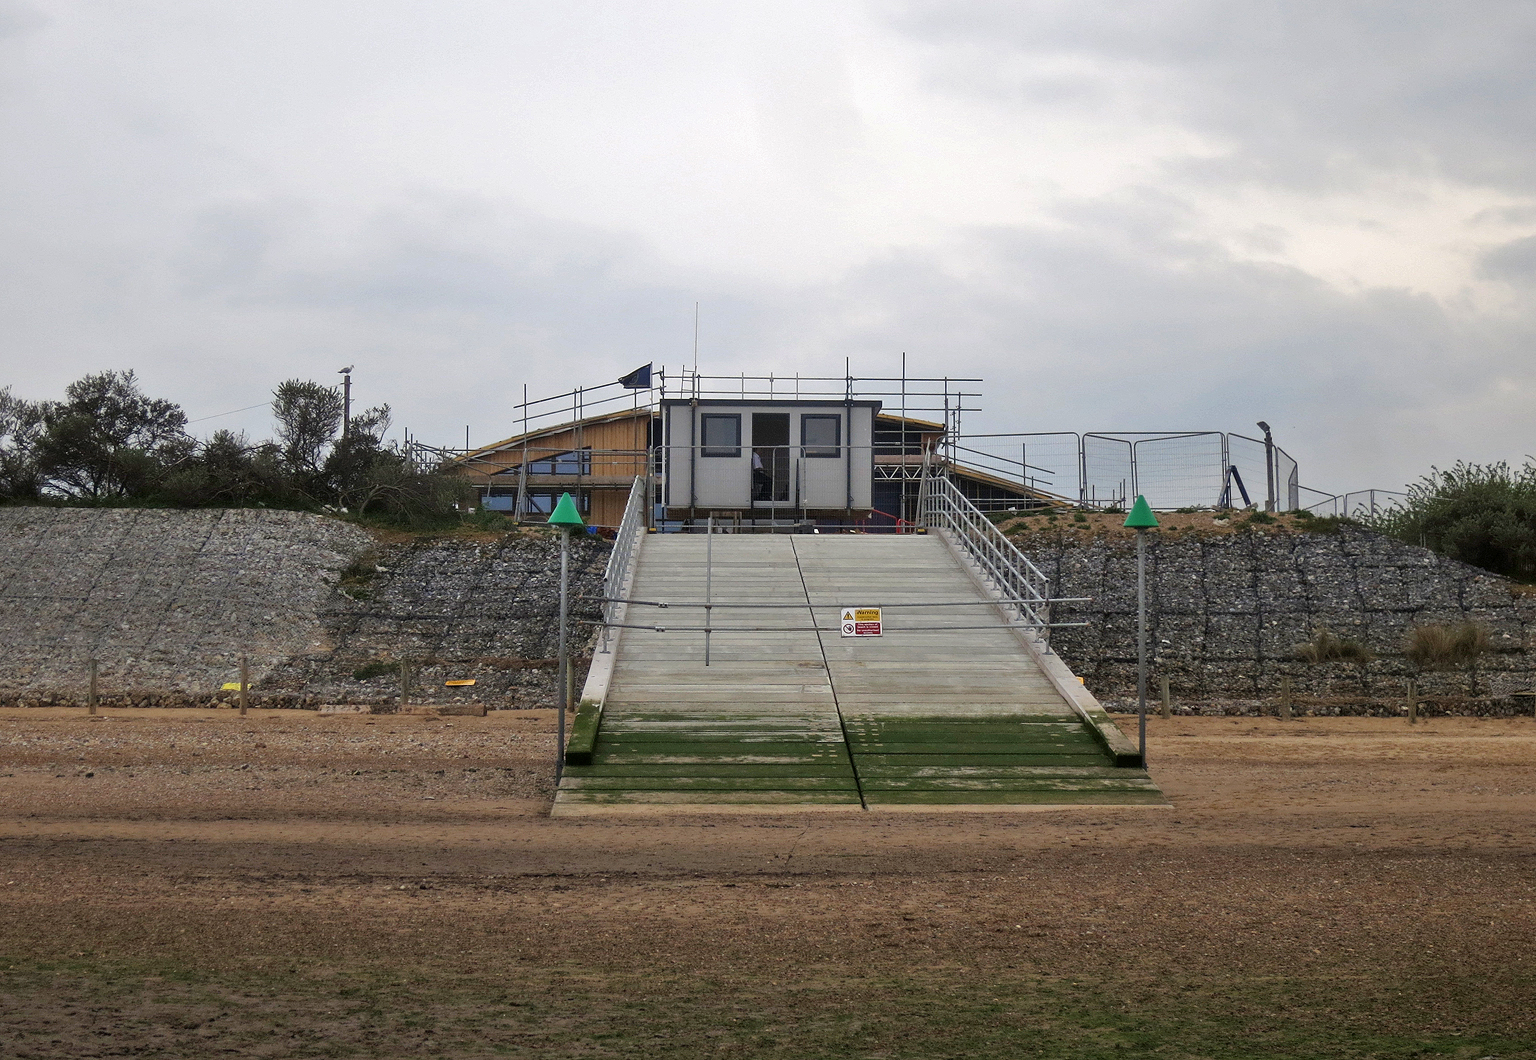 ALB launching ramp with temporary Coastwatch cabin at the top